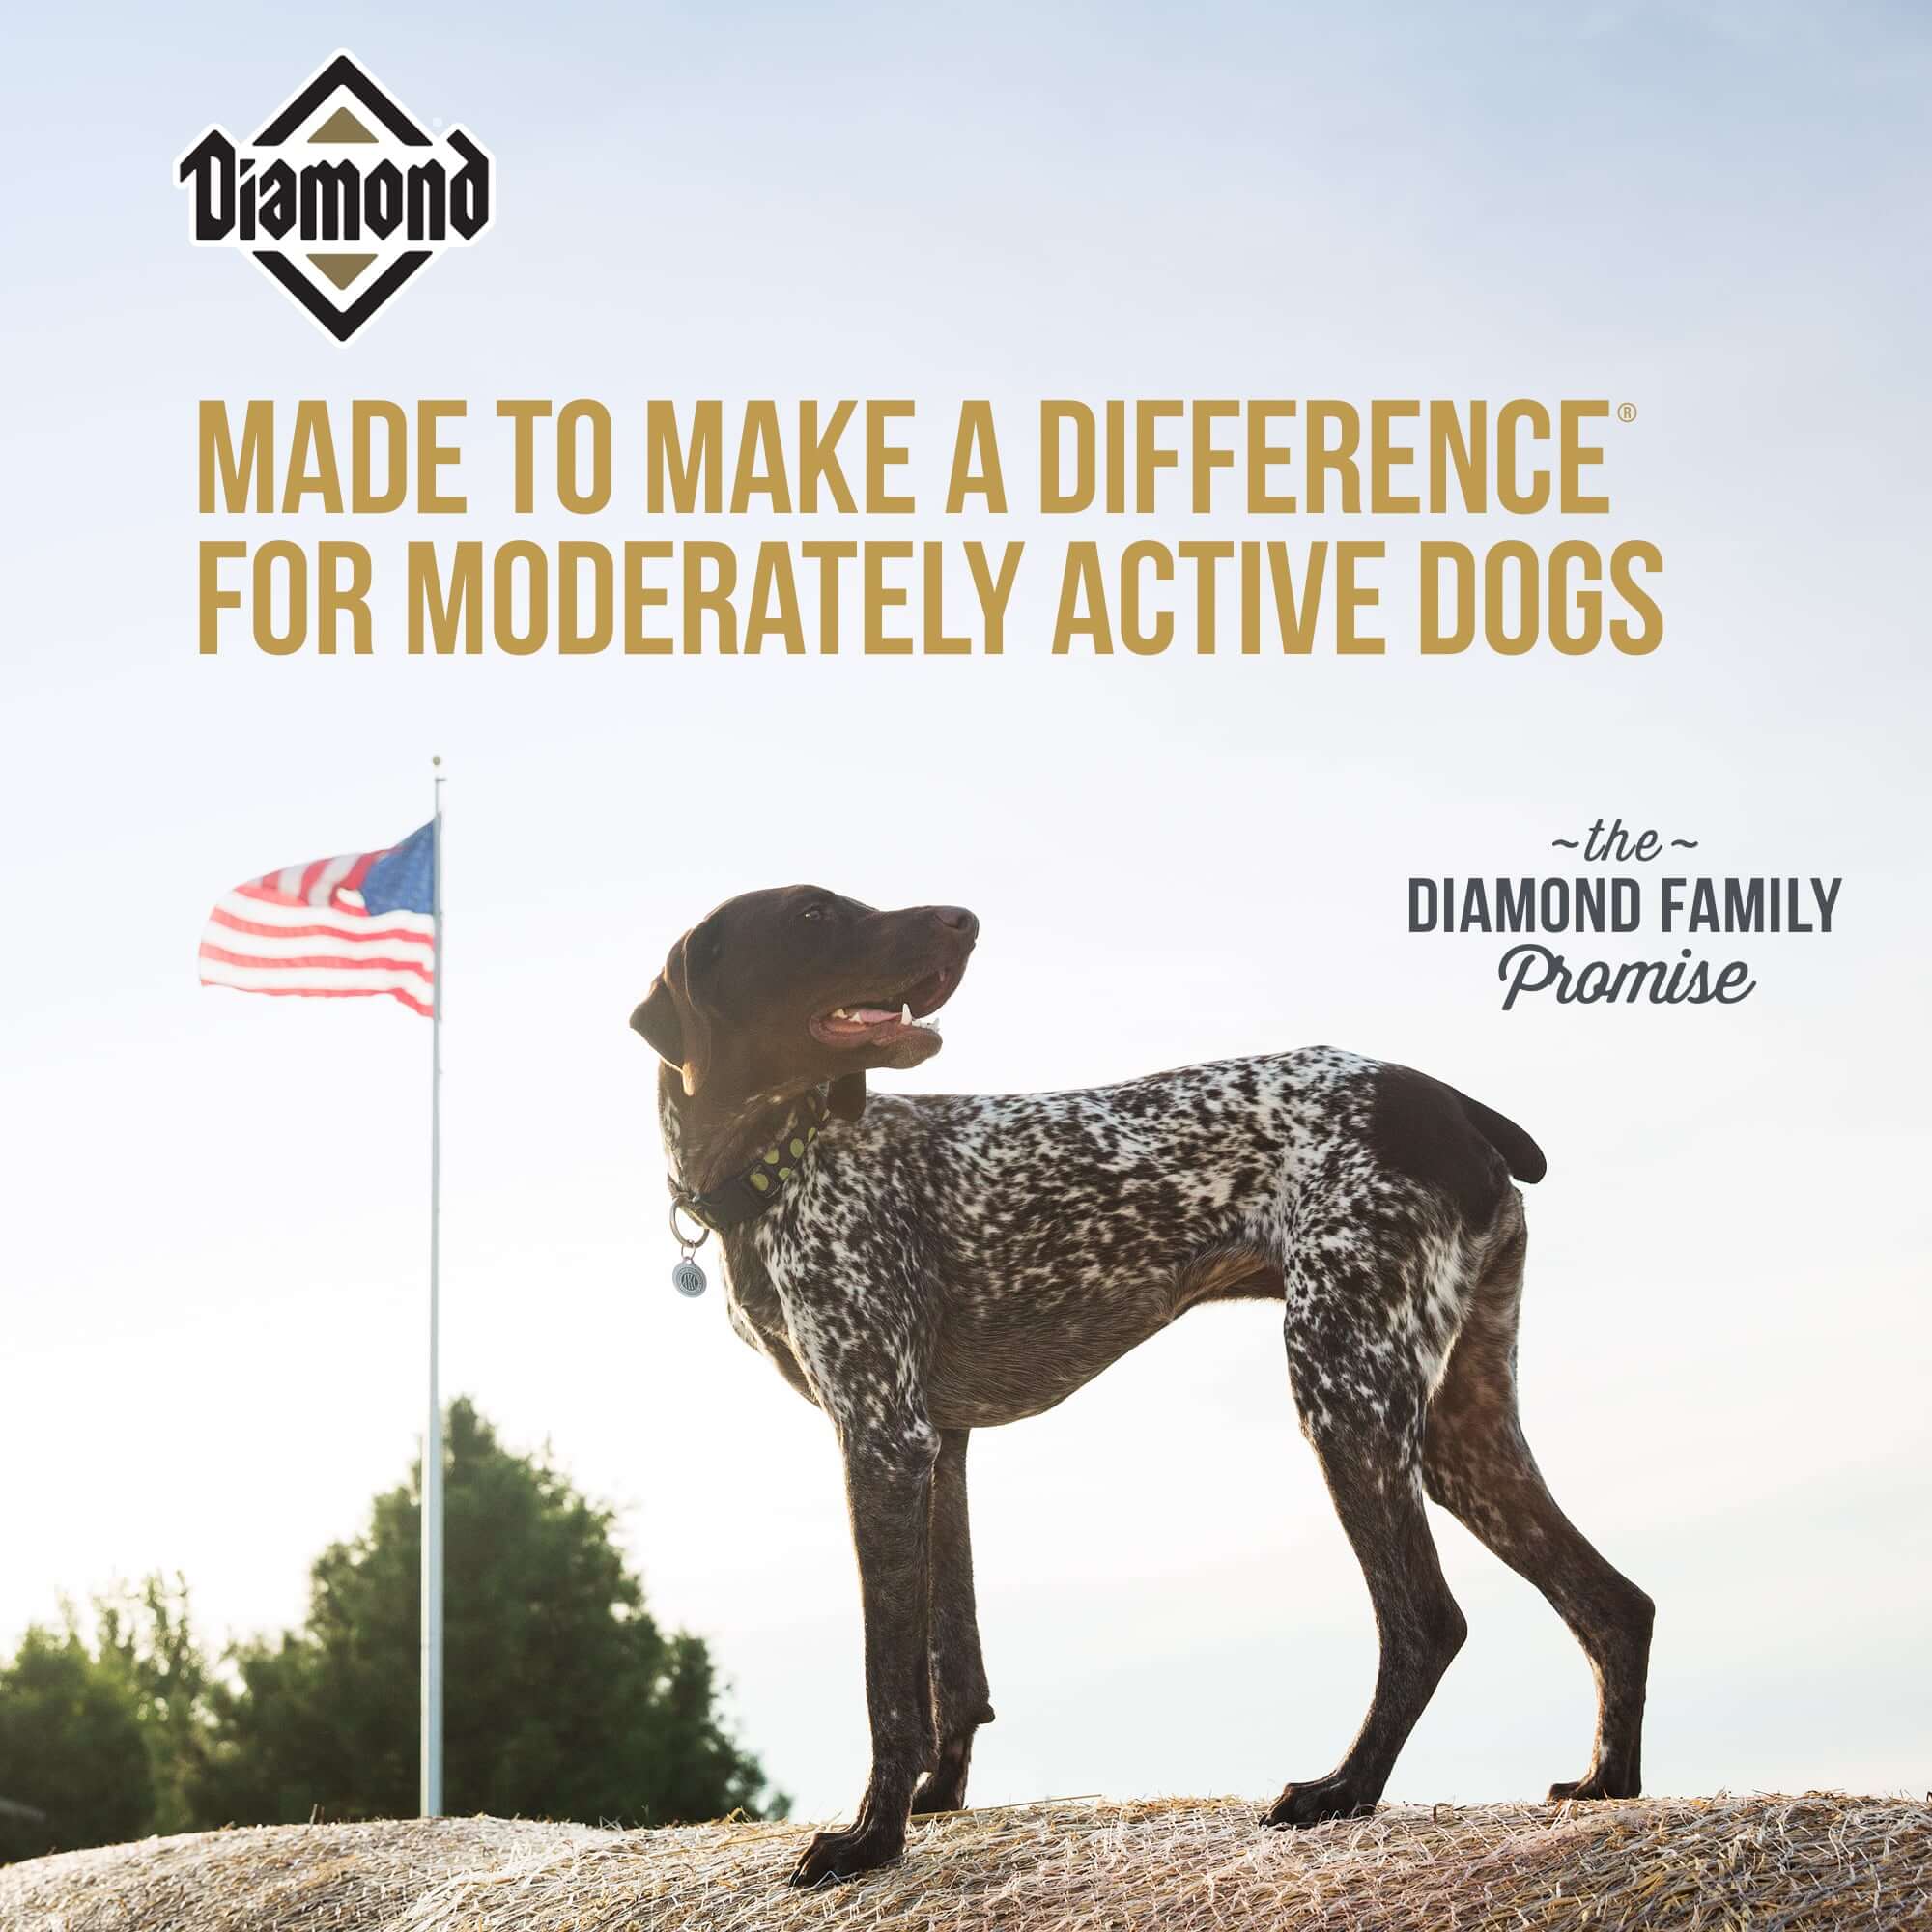 Made to make a difference for moderately active dogs